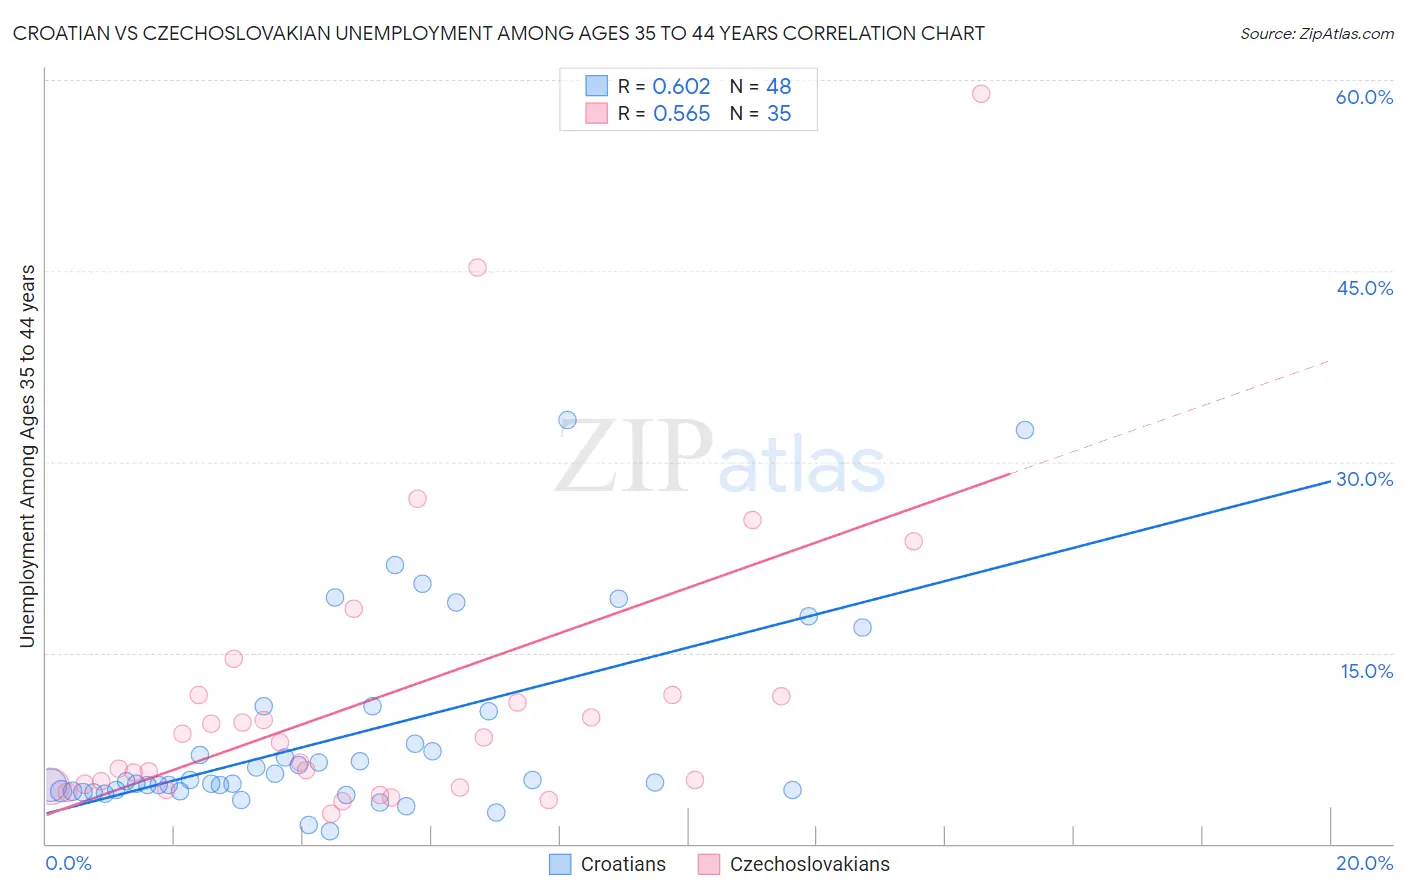 Croatian vs Czechoslovakian Unemployment Among Ages 35 to 44 years